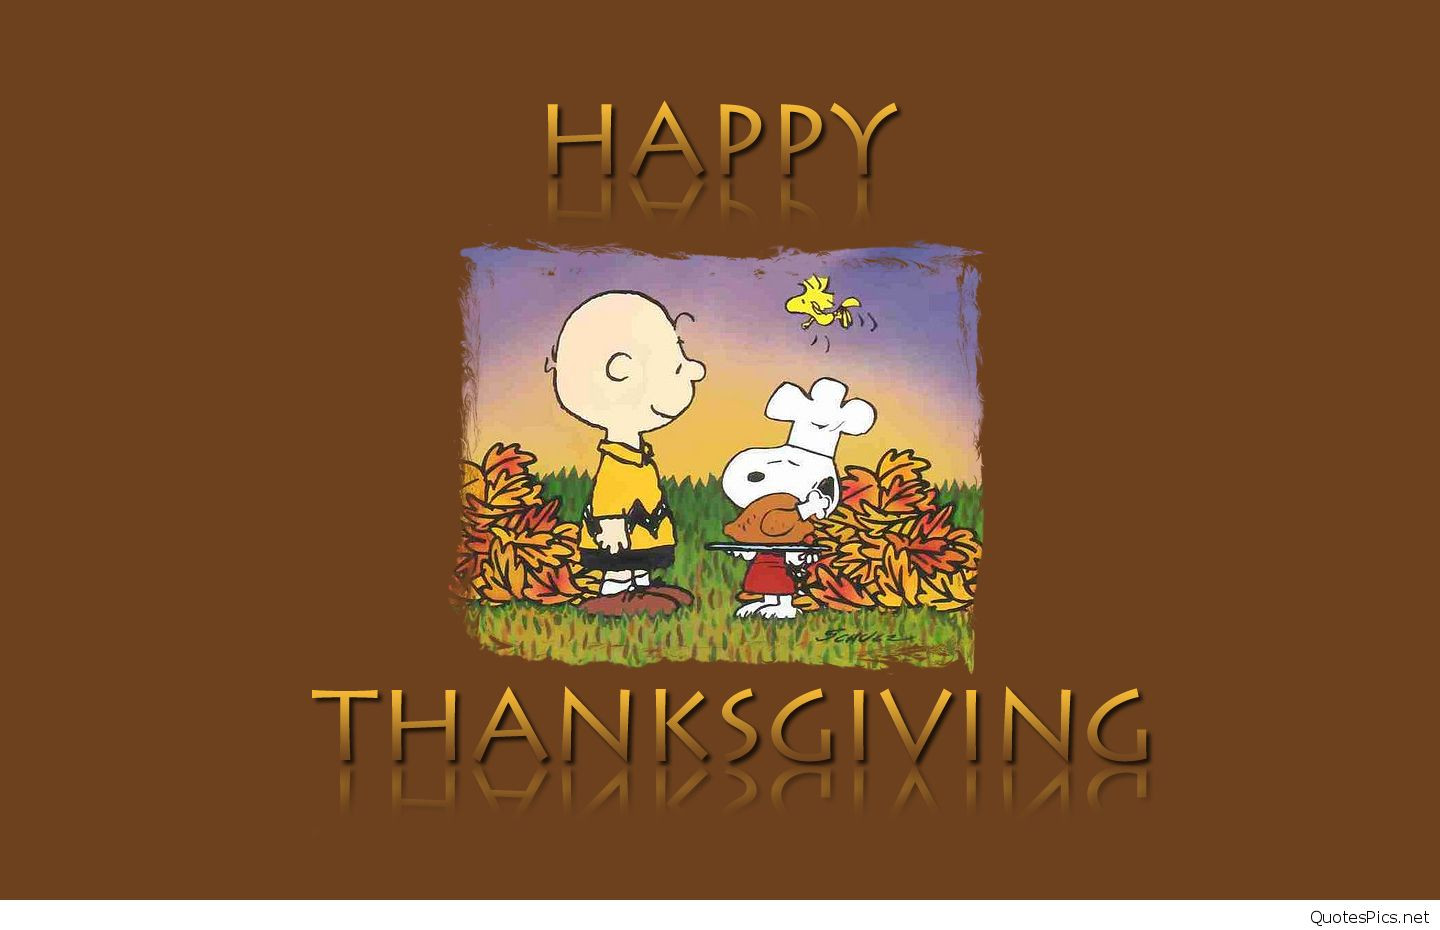 Thanksgiving Quotes Cute
 Cute Happy Thanksgiving wallpapers quotes images 2016 2017